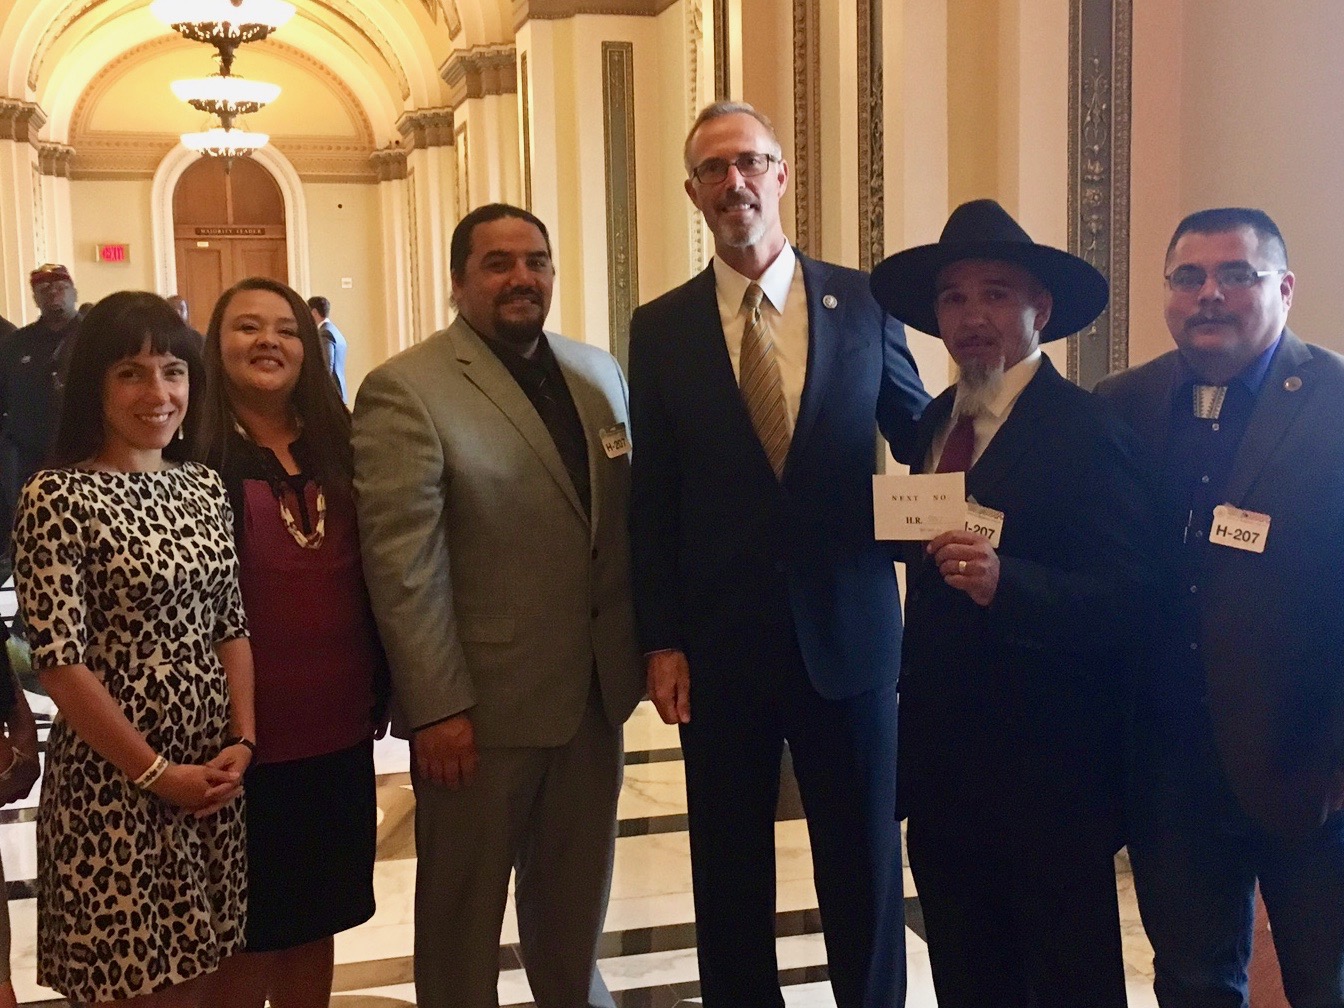 Yurok Tribe welcomes introduction of bill to add important lands to reservation